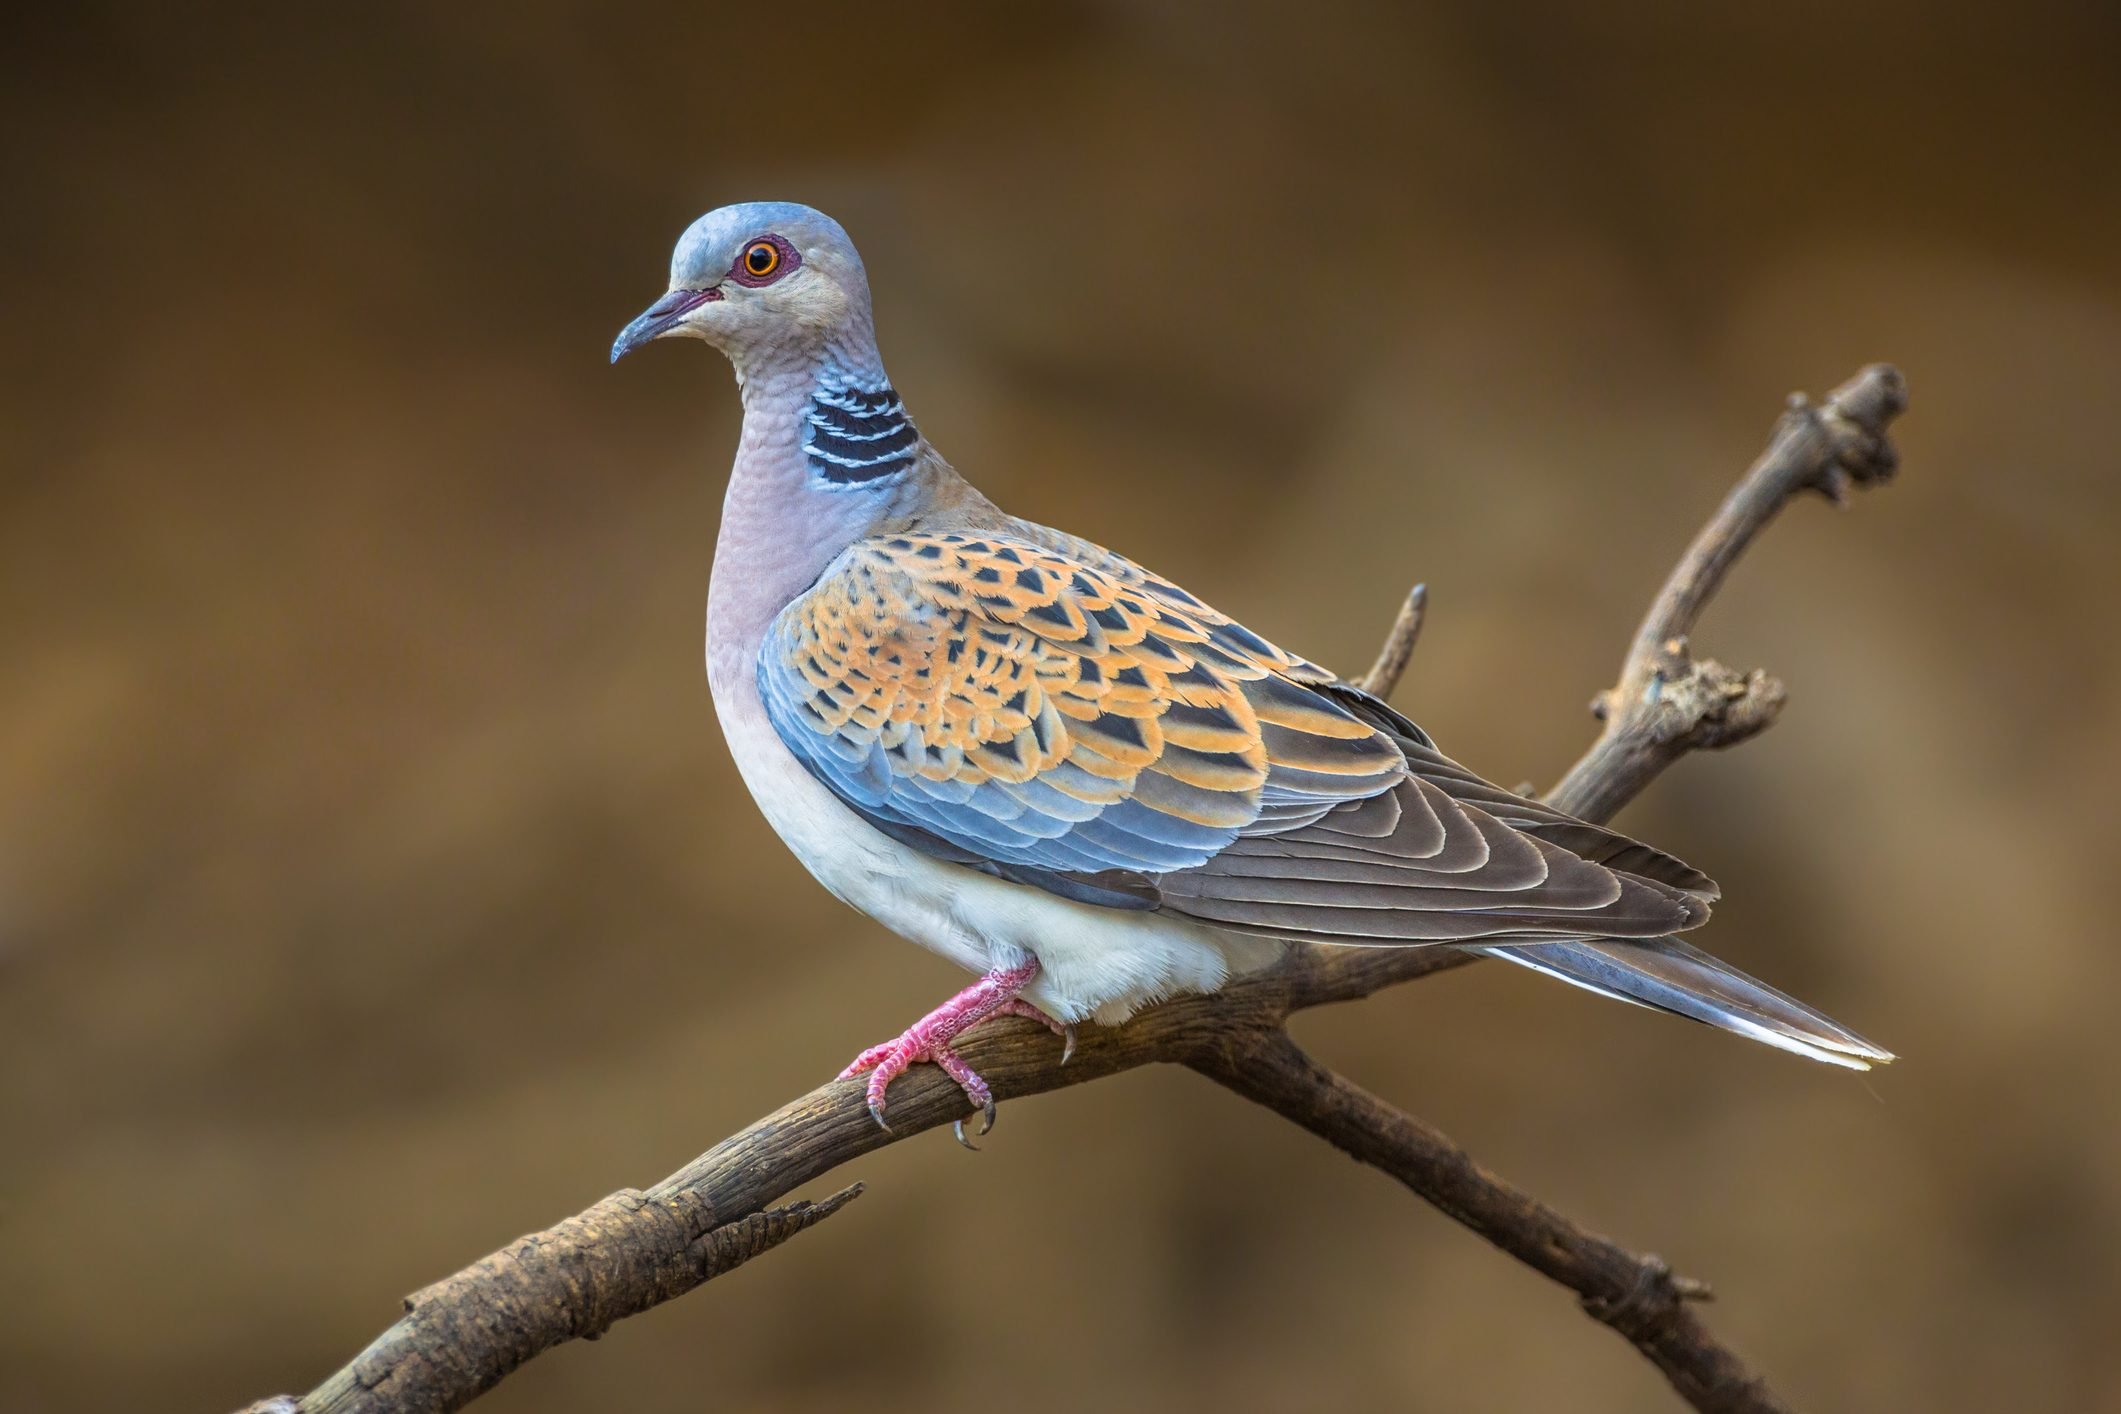 Is a Turtledove a Real Type of Bird?